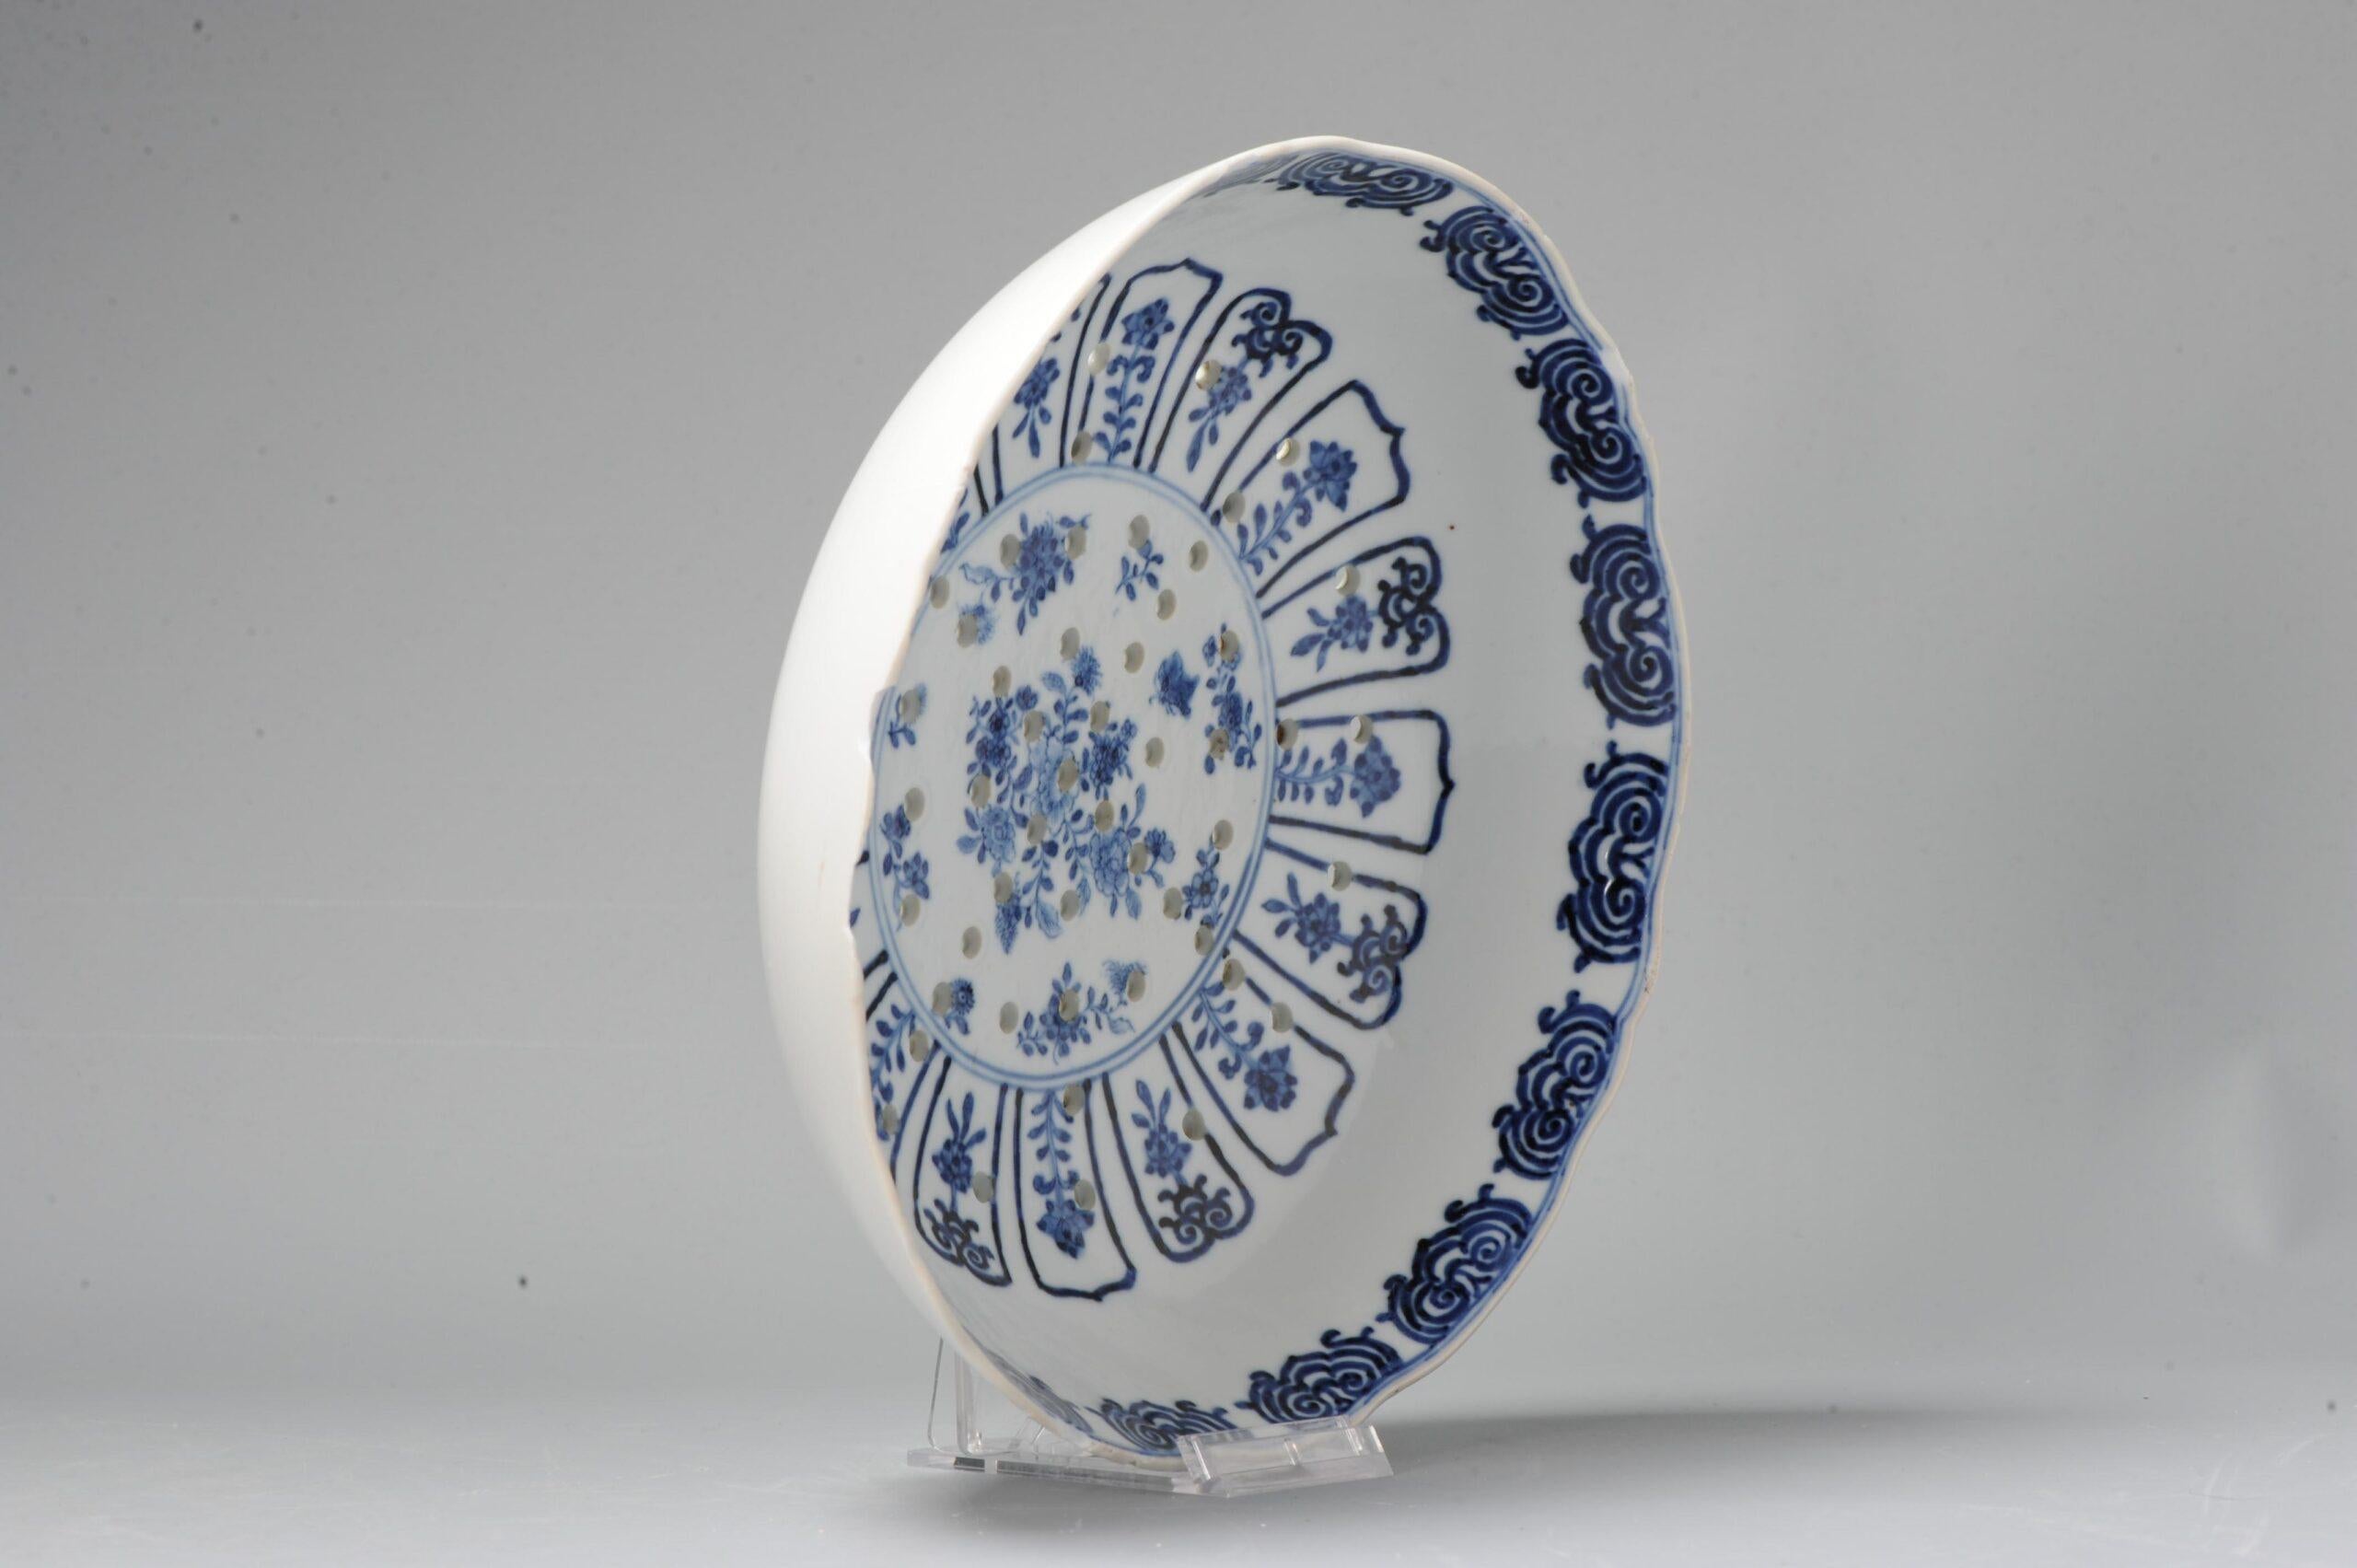 A nice strainer. Qing Dynasty - Qing Period. Central scene of flowers.

Additional information:
Material: Porcelain & Pottery
Color: Blue & White
Region of Origin: China
Emperor: Qianlong (1735-1796)
Period: 17th century
Age: Pre-1800